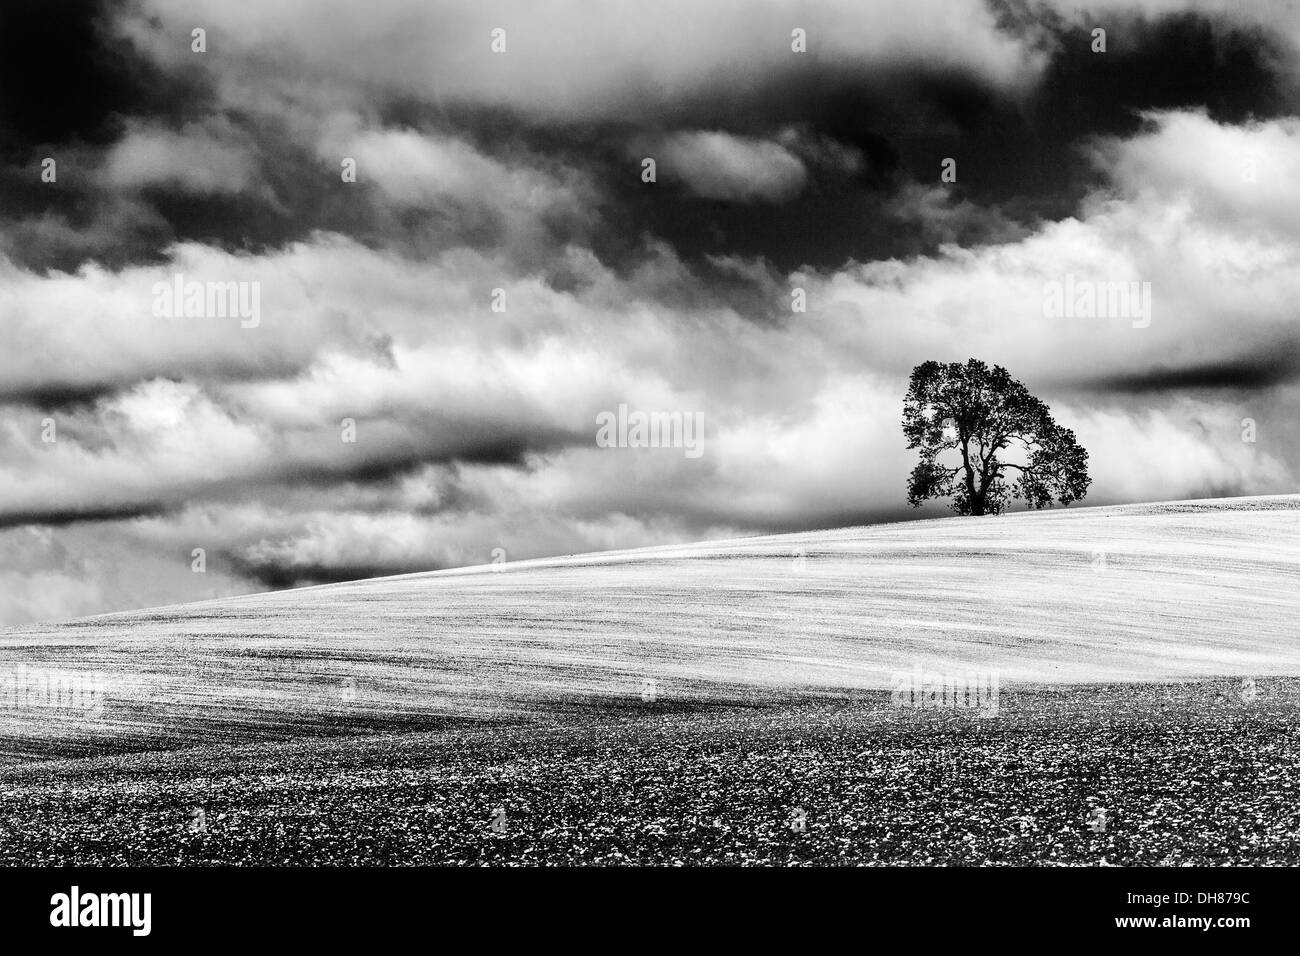 A simple monochrome image of a tree atop a ploughed chalk field with a dramatic cloudy sky. Stock Photo